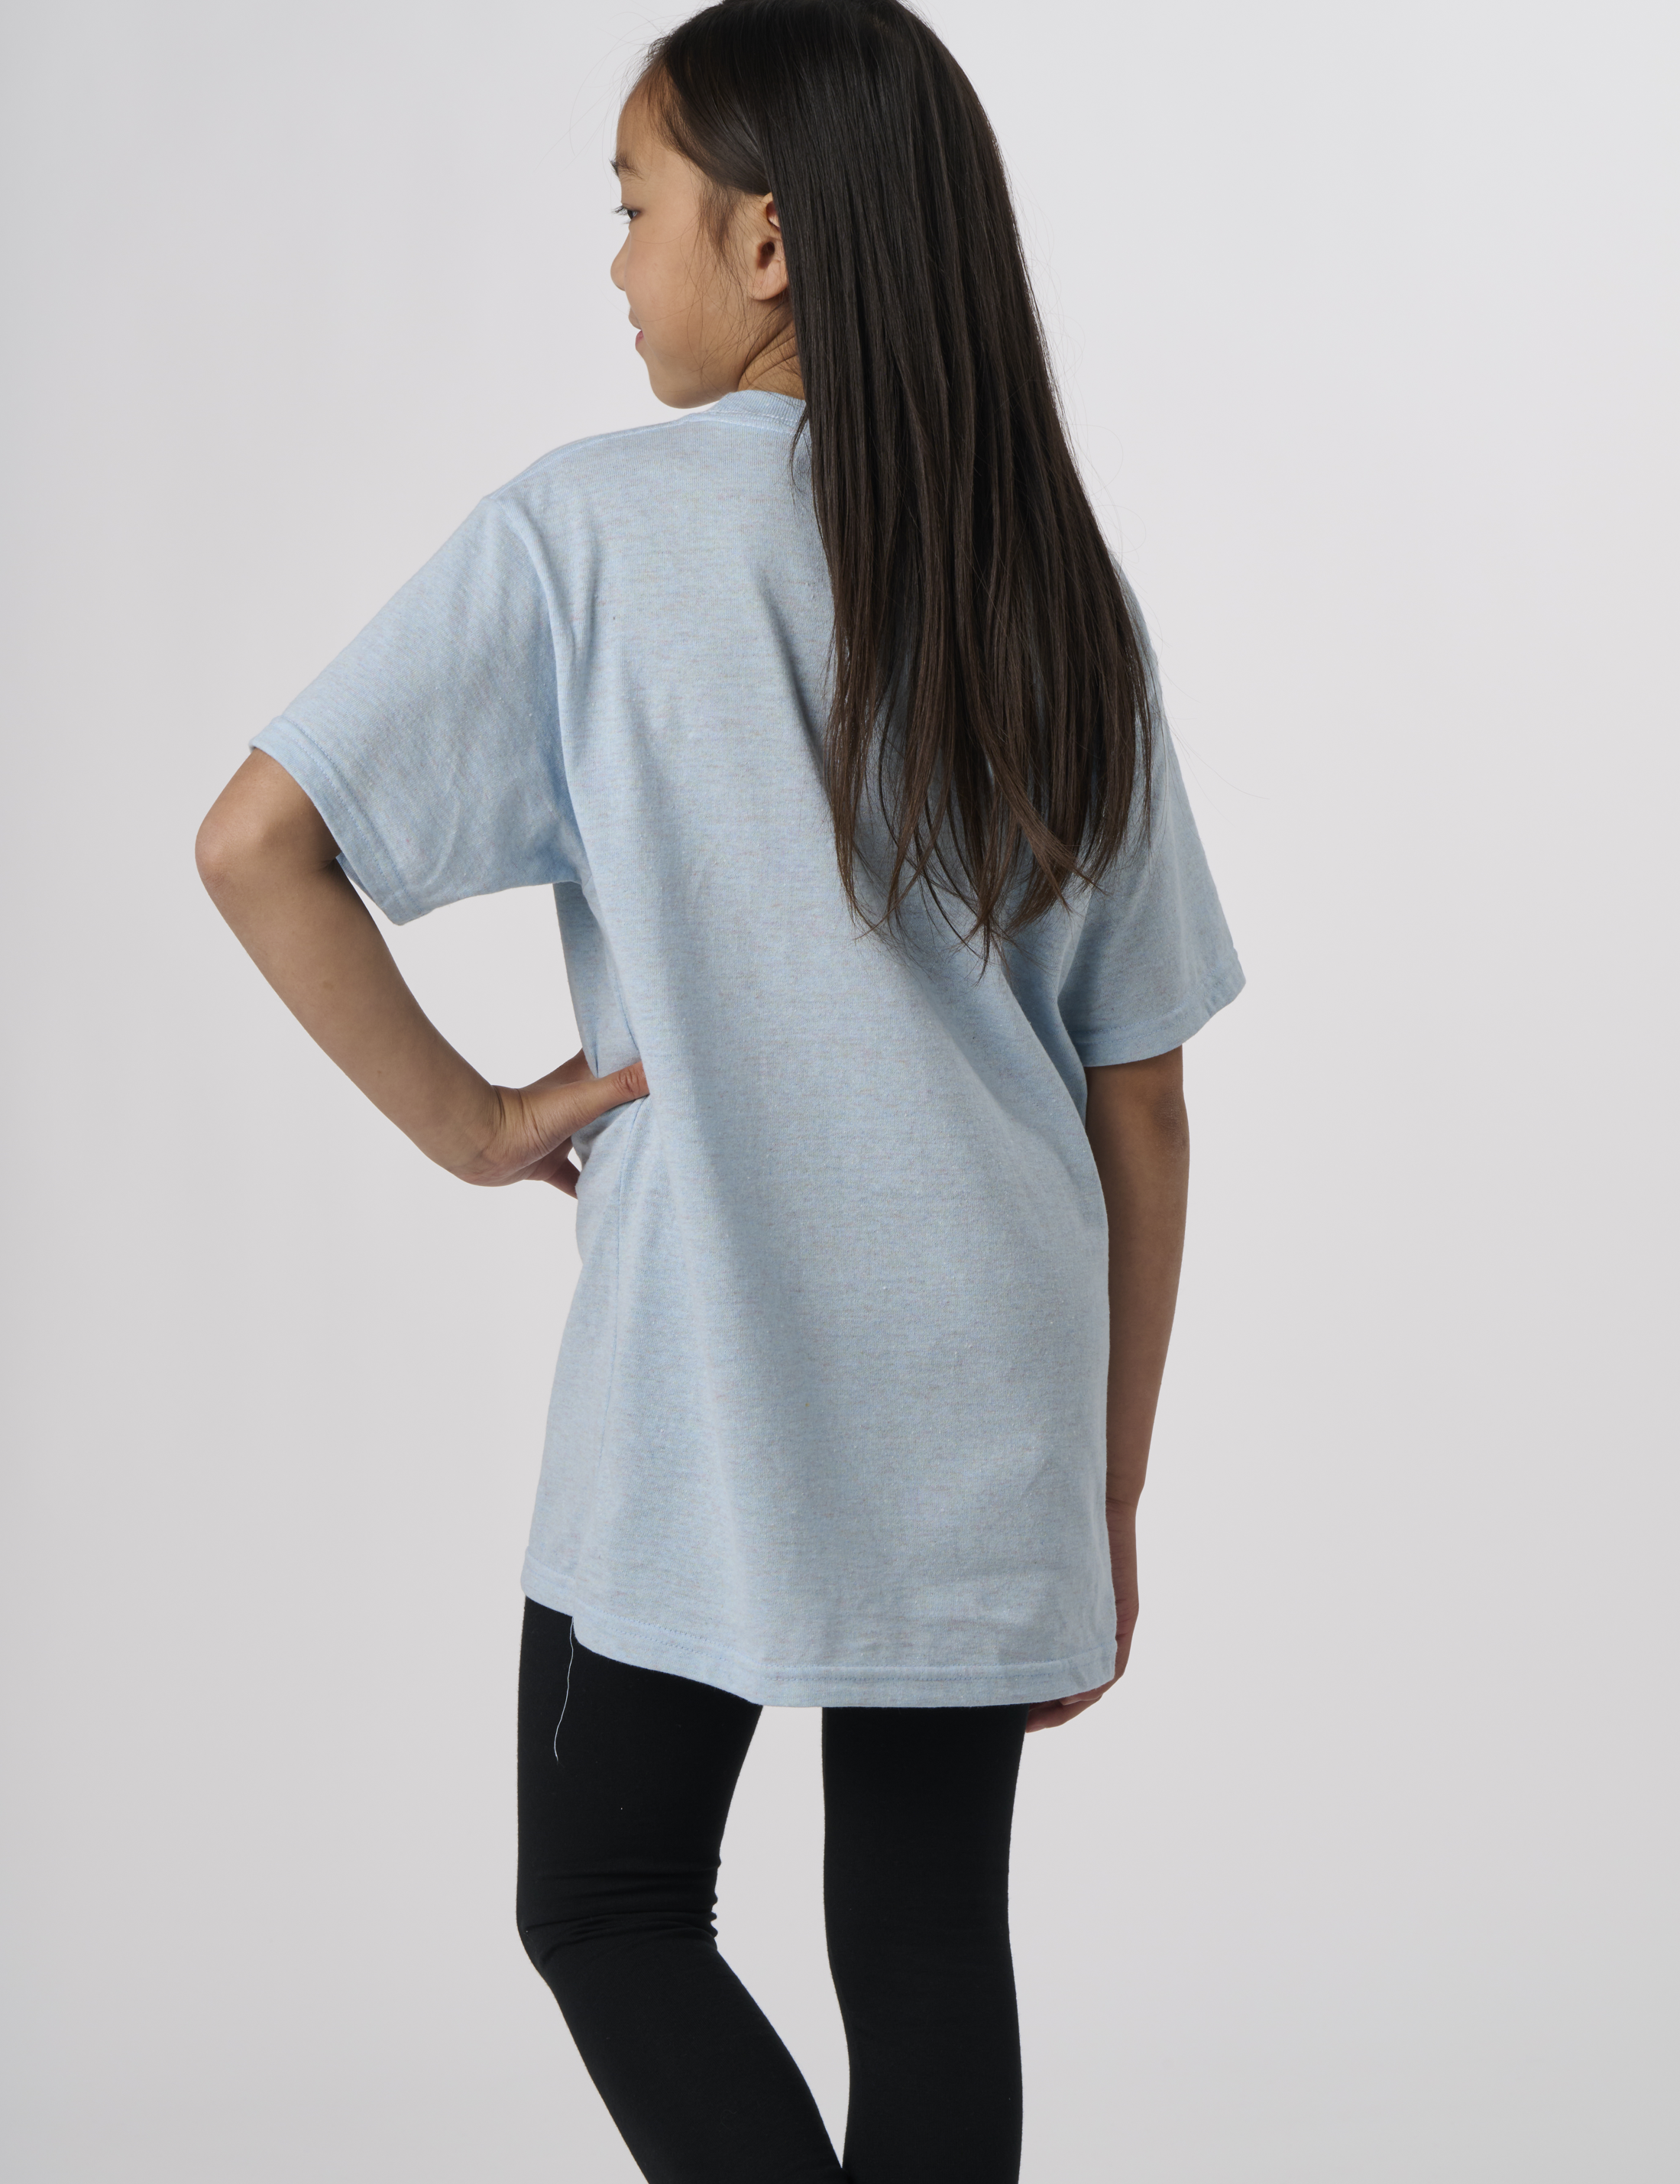 RECOVER_RY100_YOUTHCLASSICSHORTSLEEVETSHIRT_COOLERBLUE_BACK.png